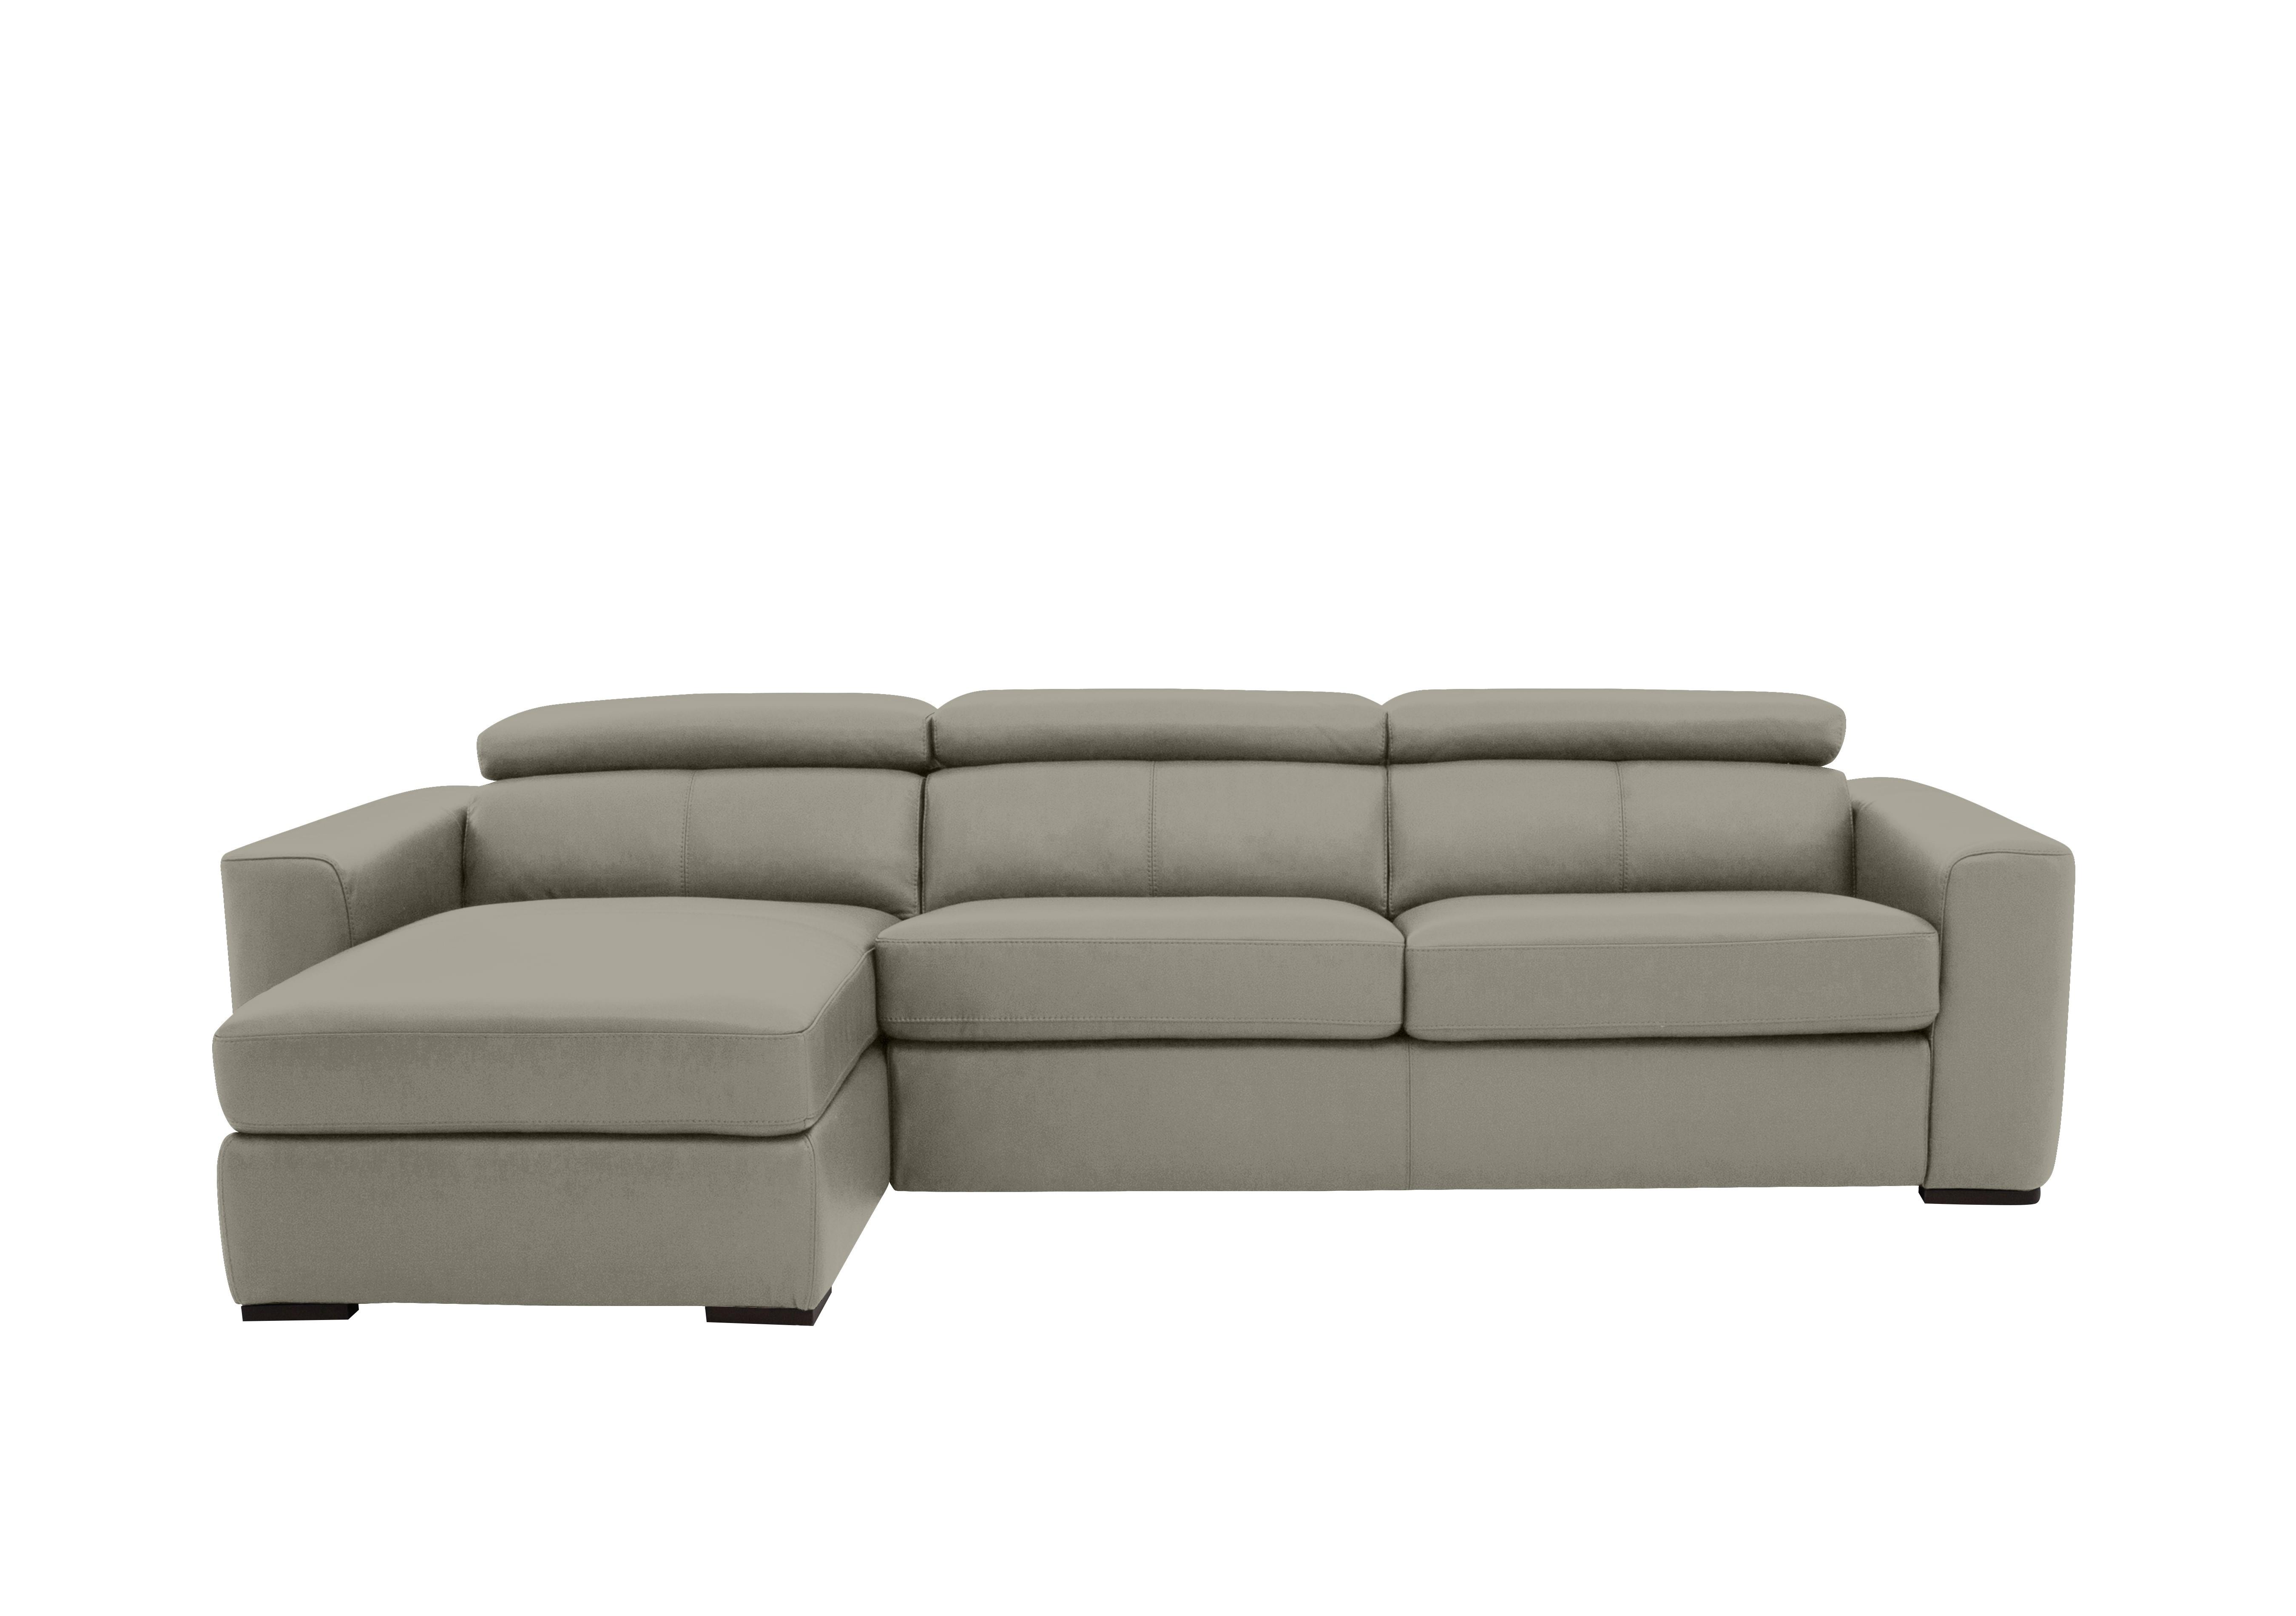 Infinity Leather Corner Chaise Sofa with Storage in Bv-946b Silver Grey on Furniture Village